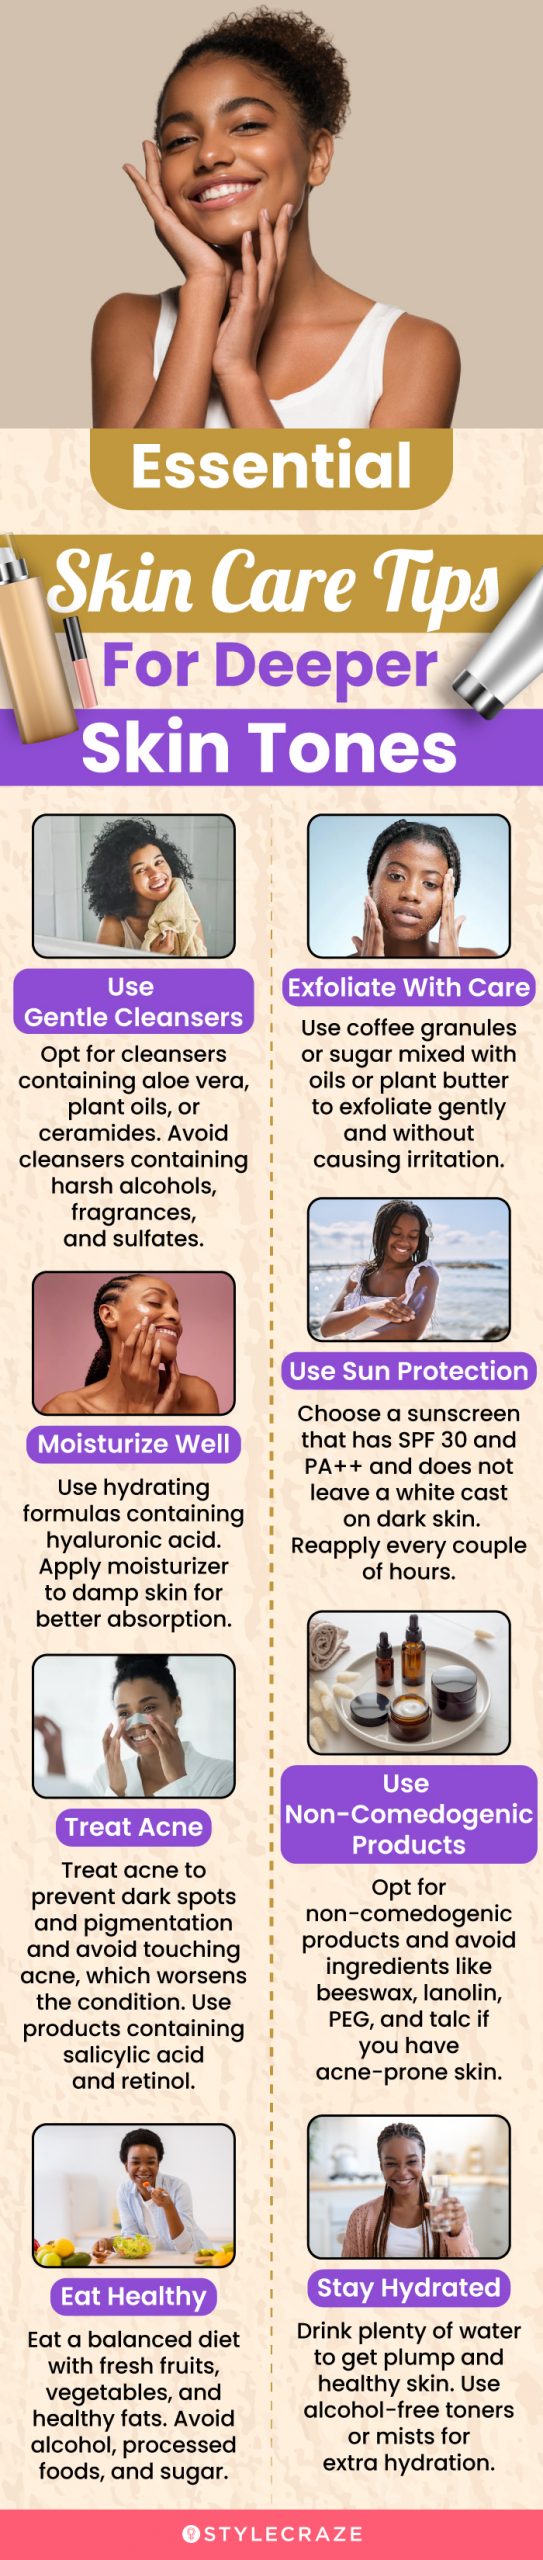 essential skincare tips for deeper skin tones (infographic)